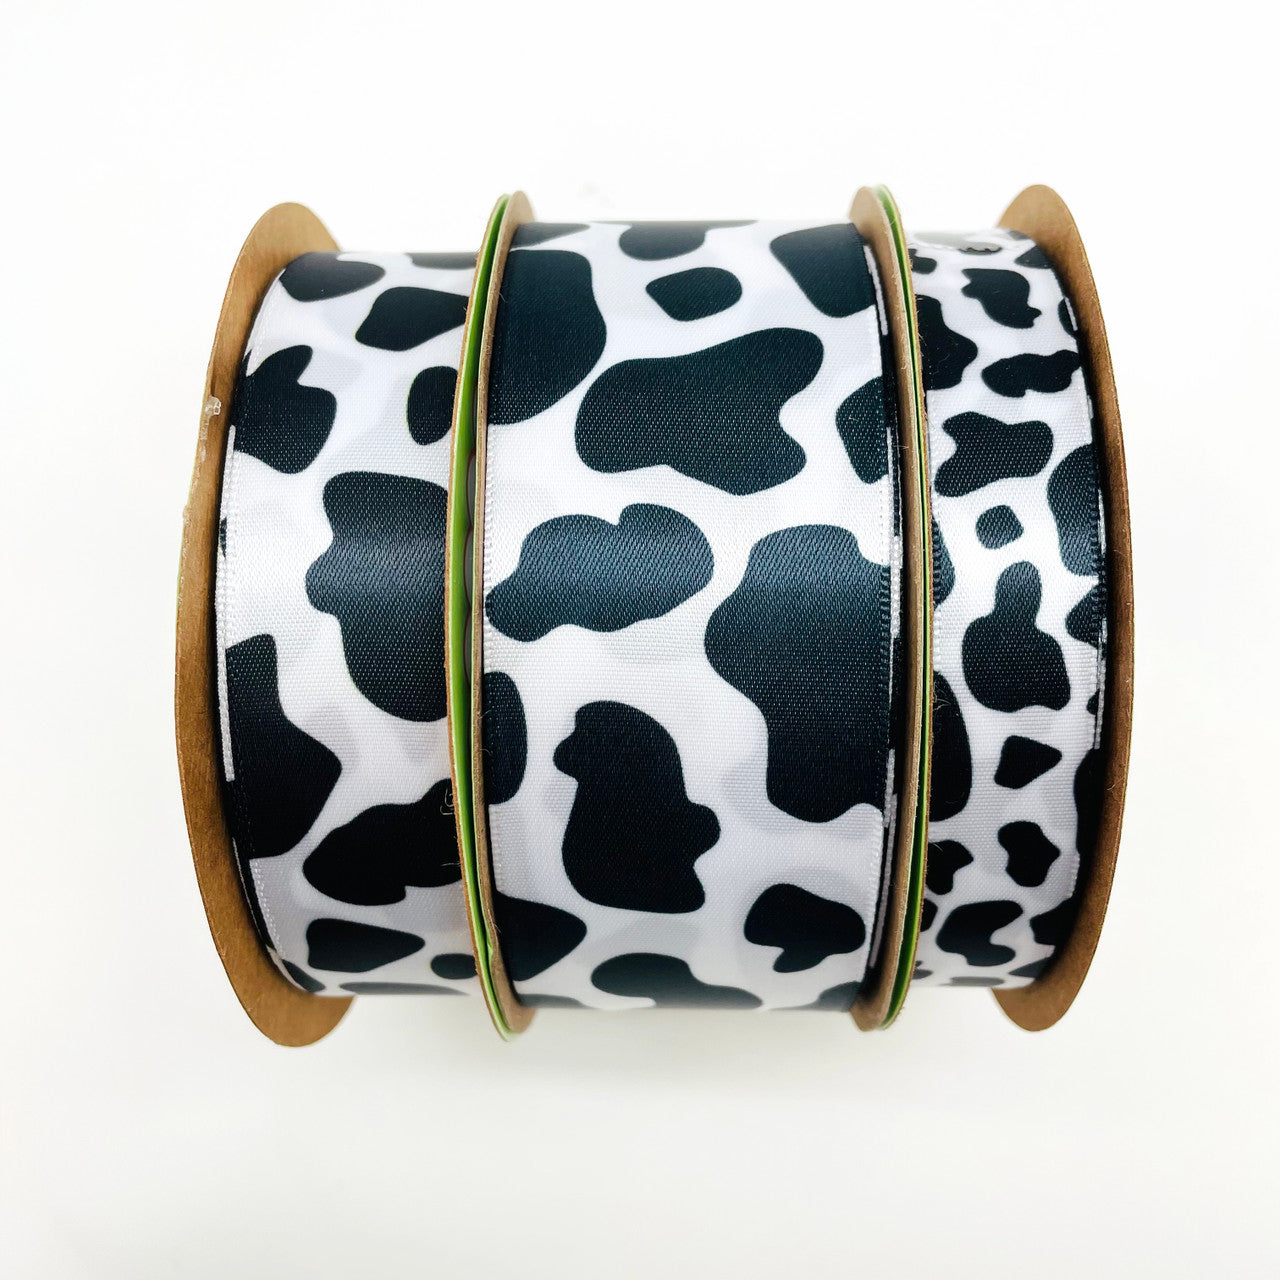 Cow print ribbon in black and white printed on 1.5 white satin